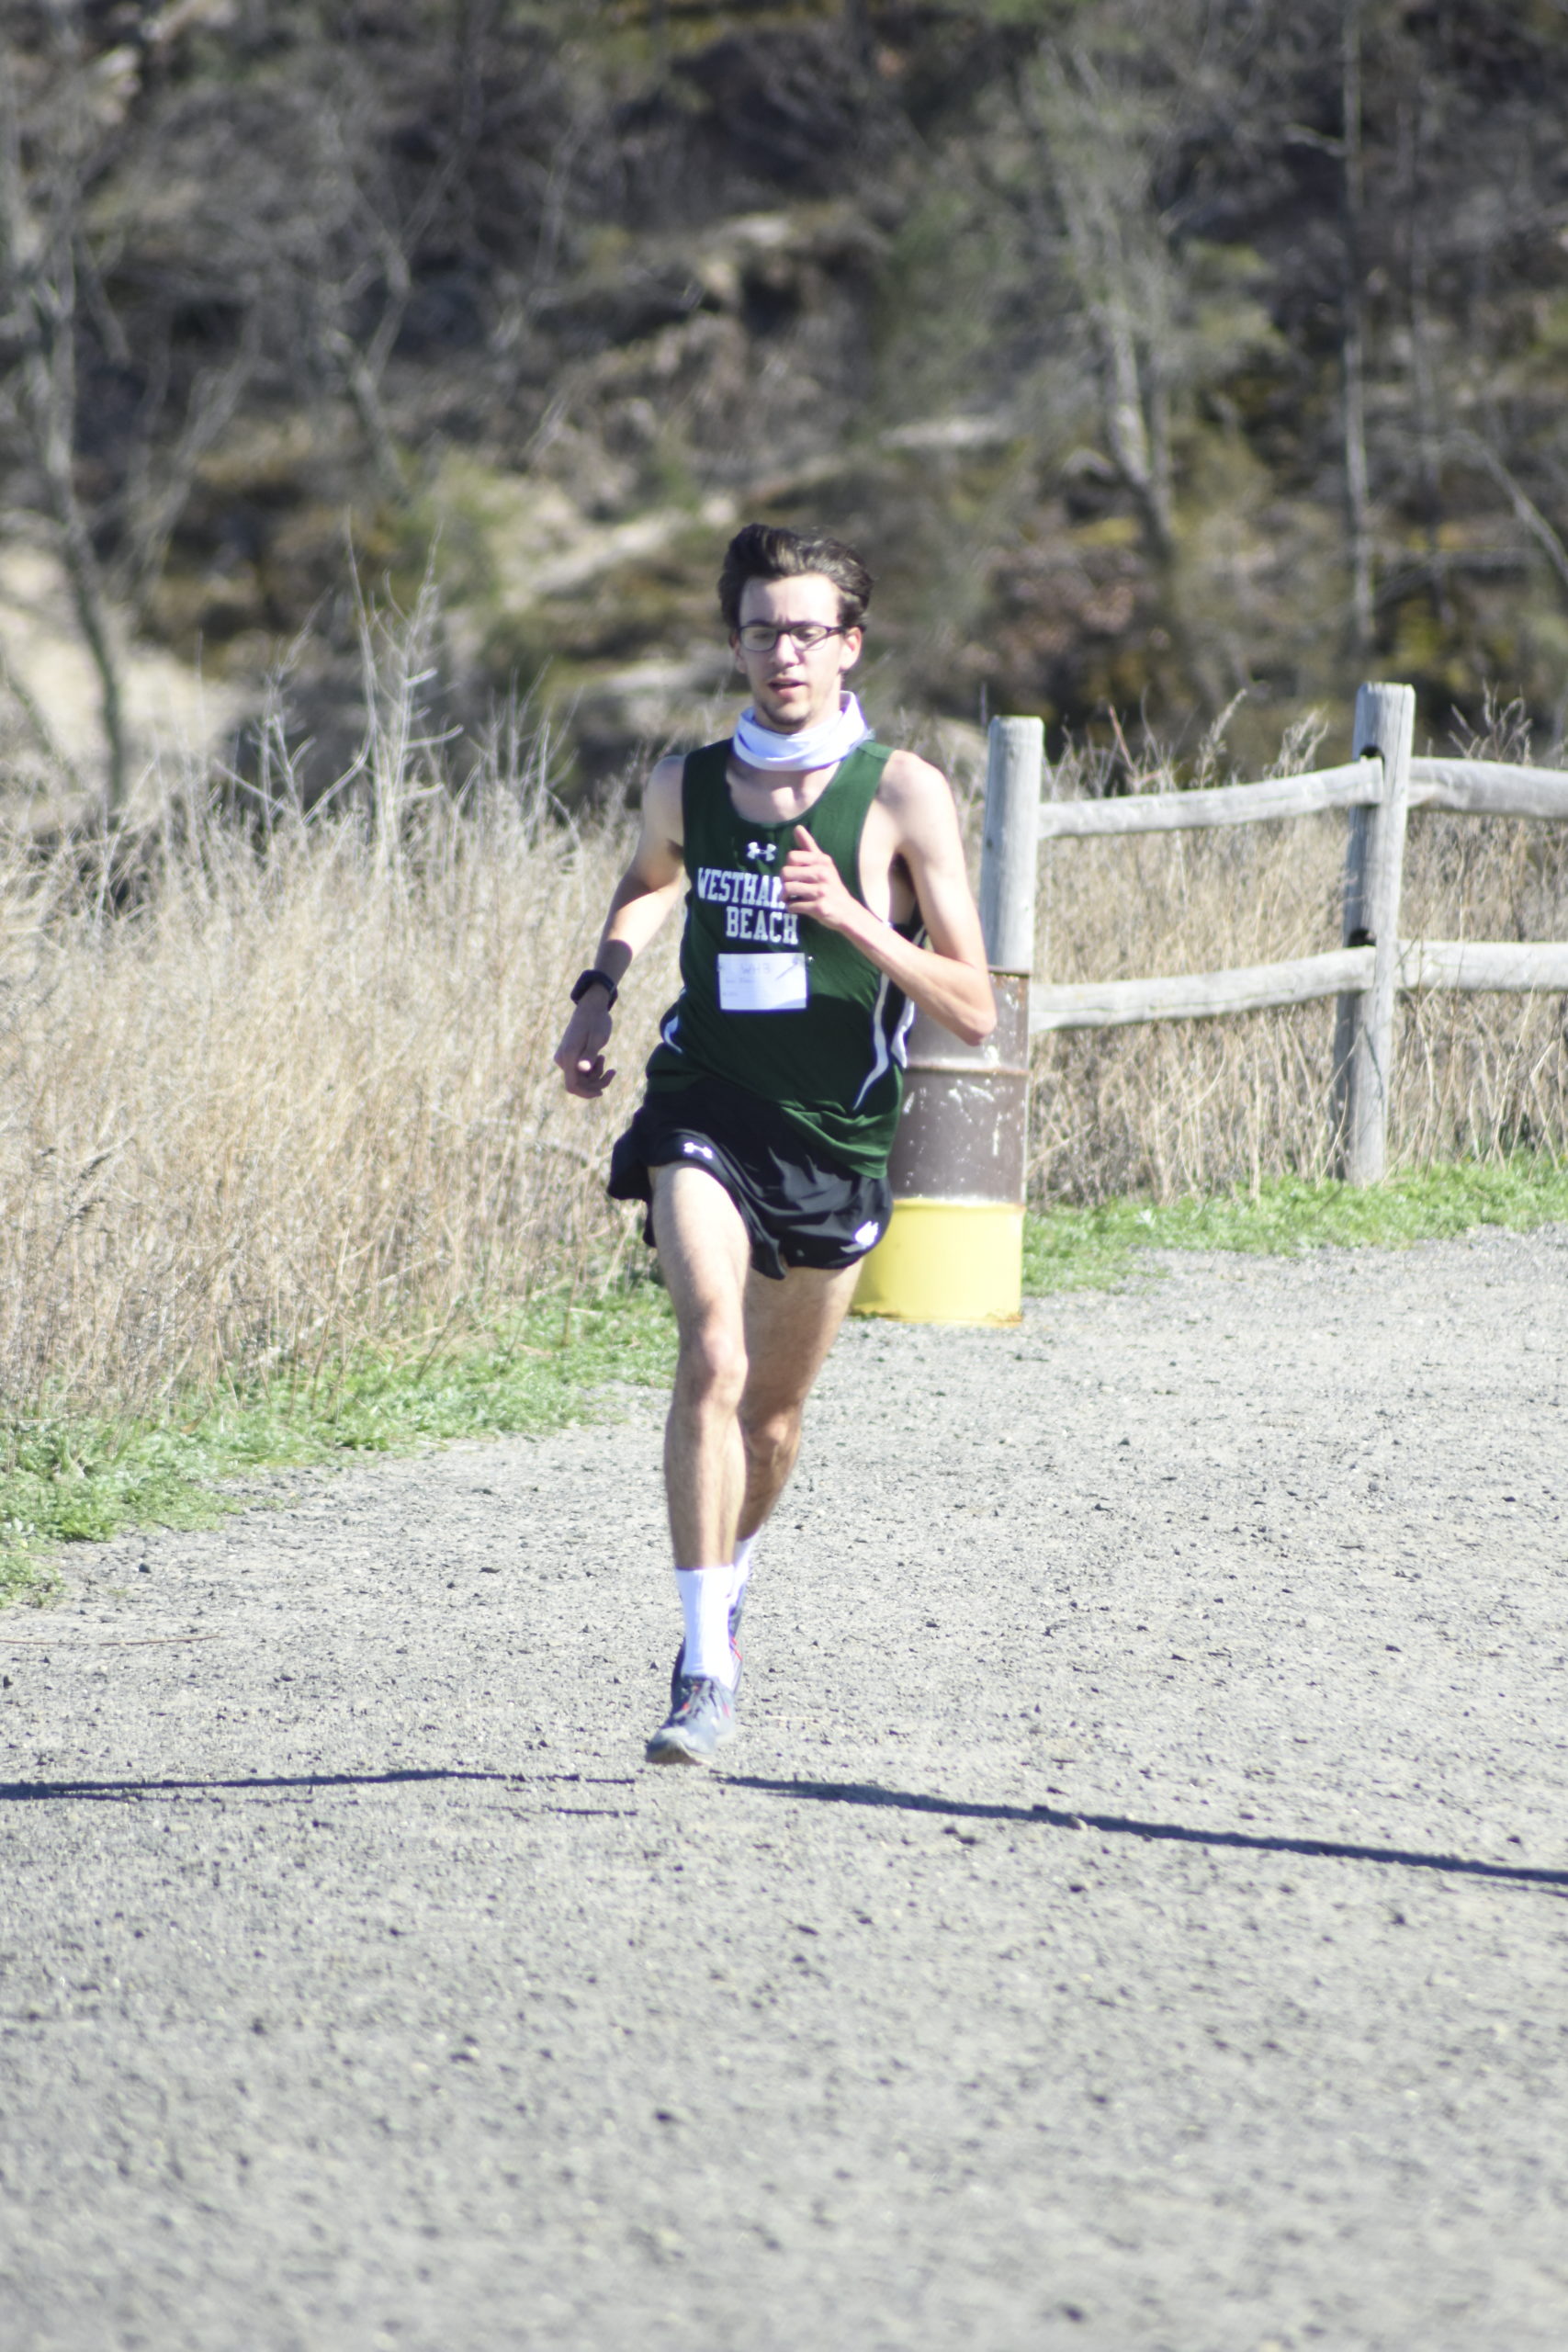 Westhampton Beach junior Gavin Ehlers won the Division III title handily on Tuesday.